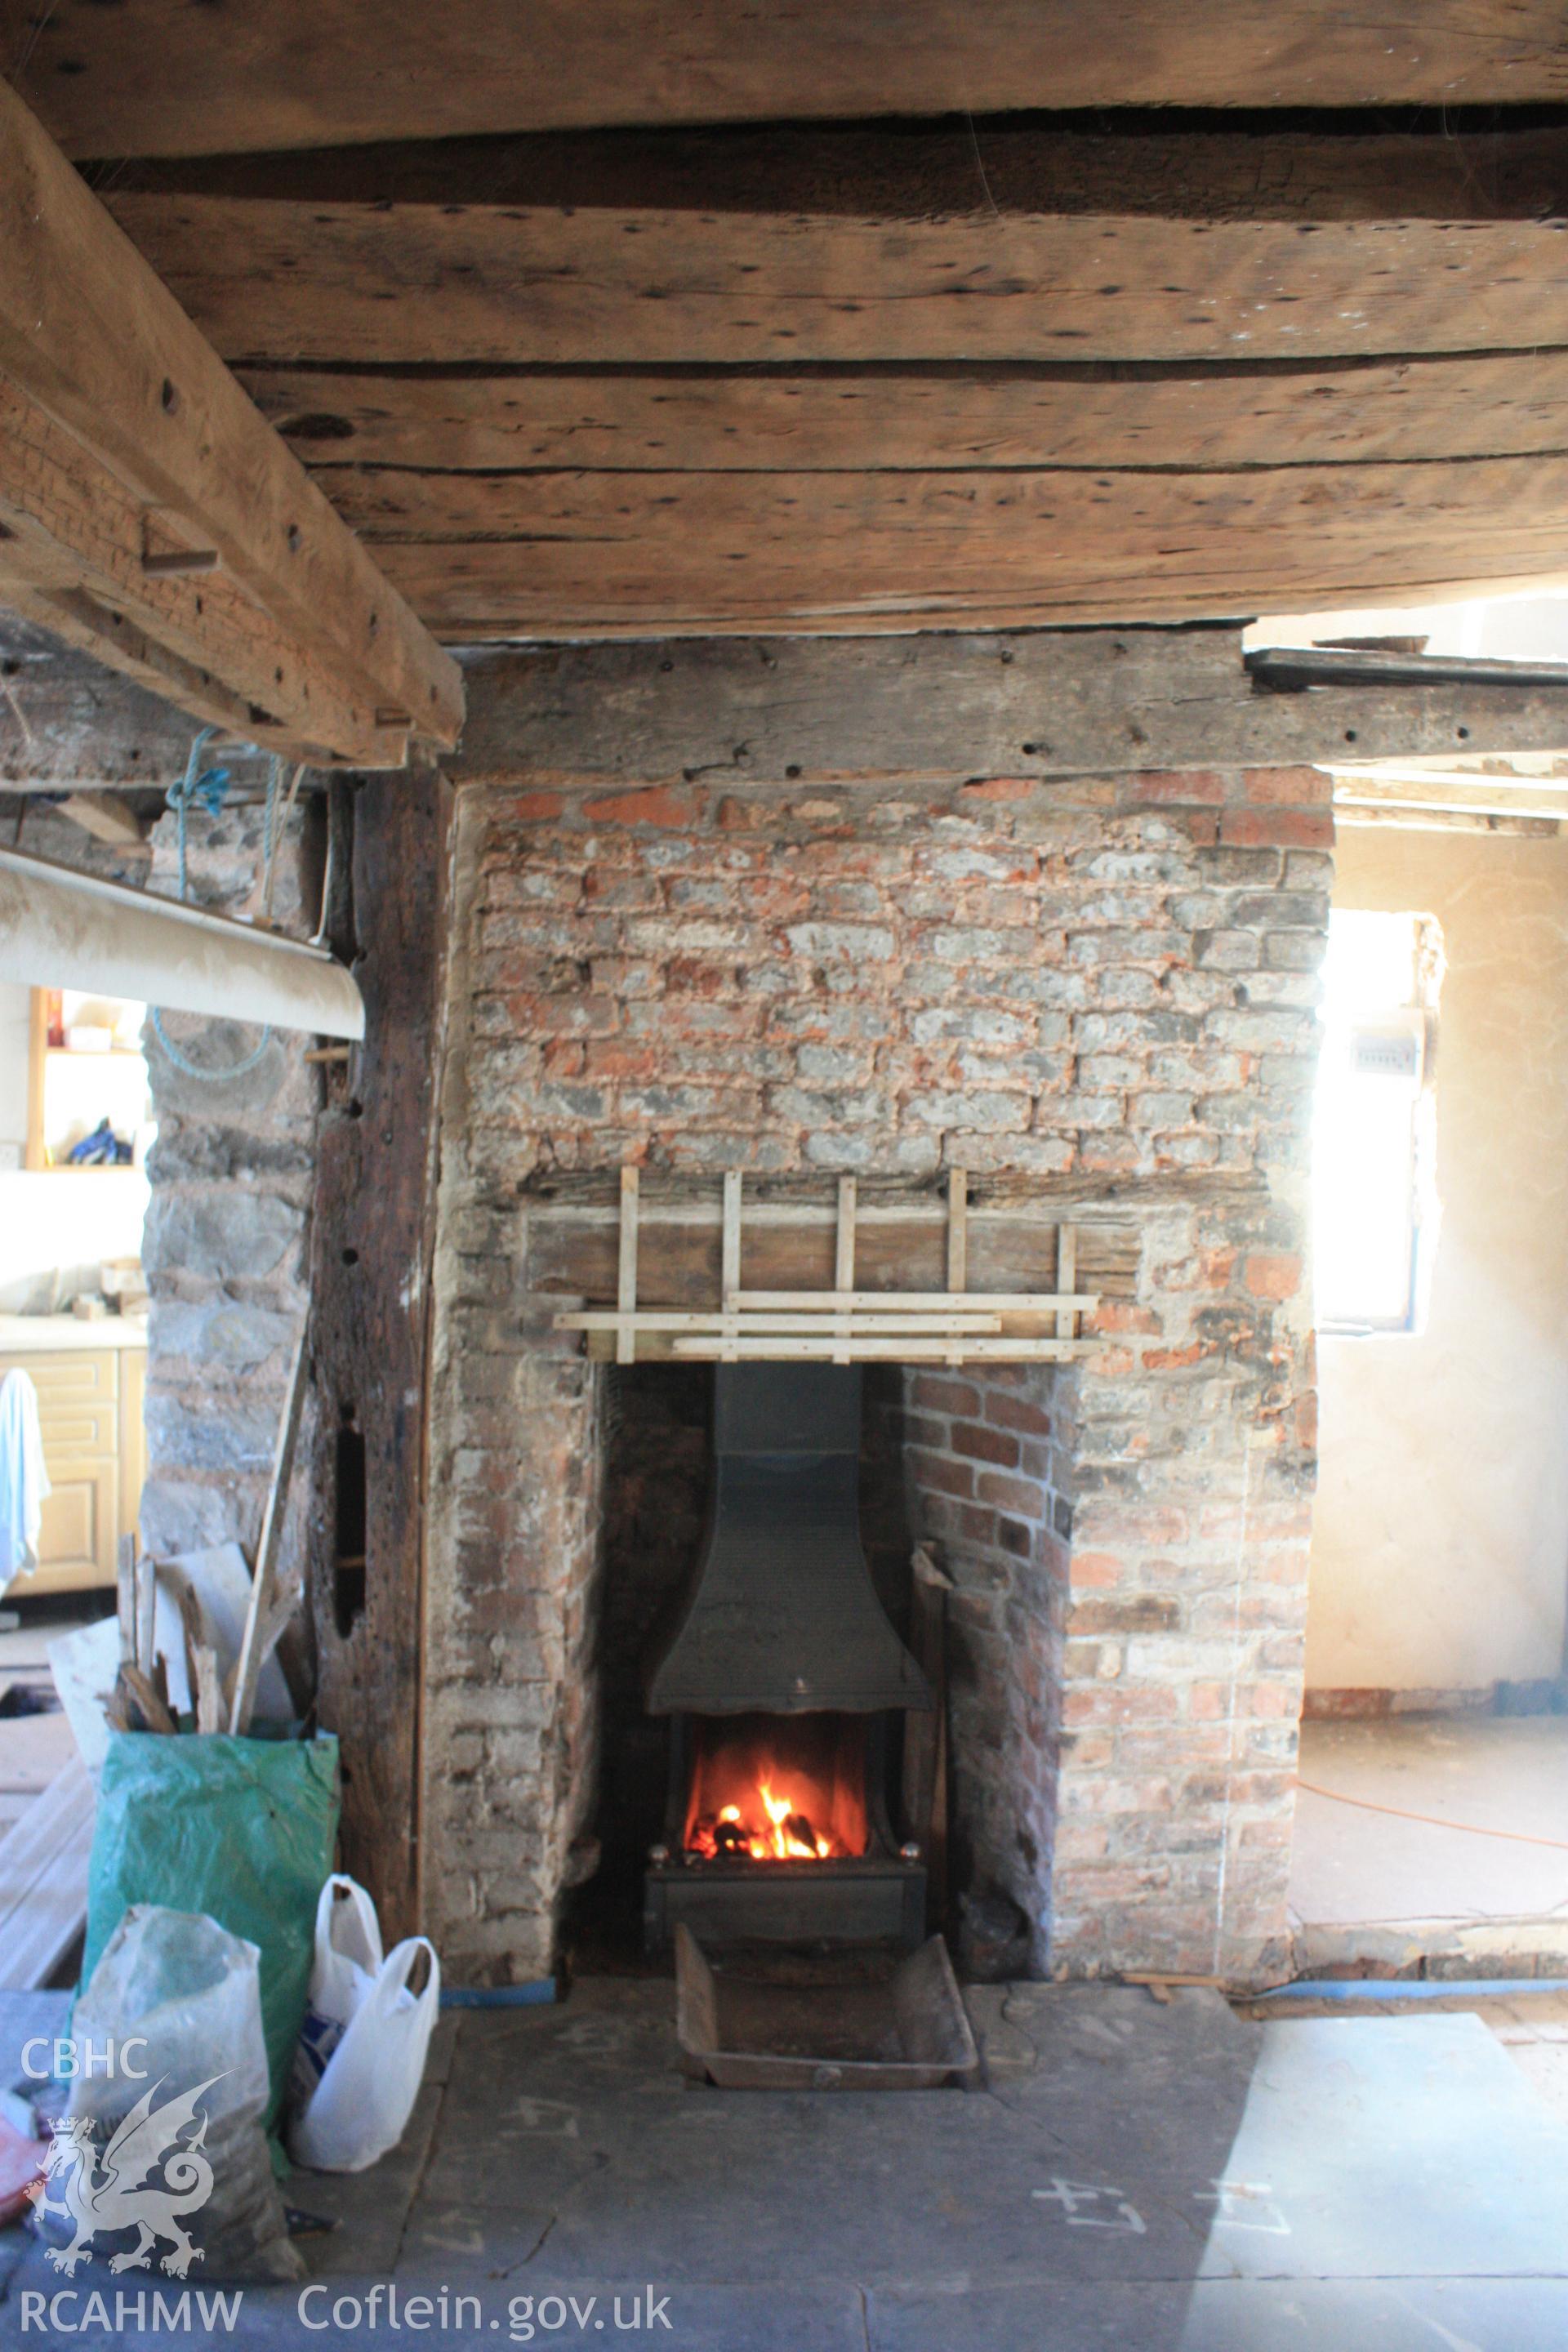 Colour photograph showing interior brick fireplace with cast iron wood burning stove at Porth-y-Dwr, 67 Clwyd Street, Ruthin. Photographed during survey conducted by Geoff Ward on 10th June 2013.